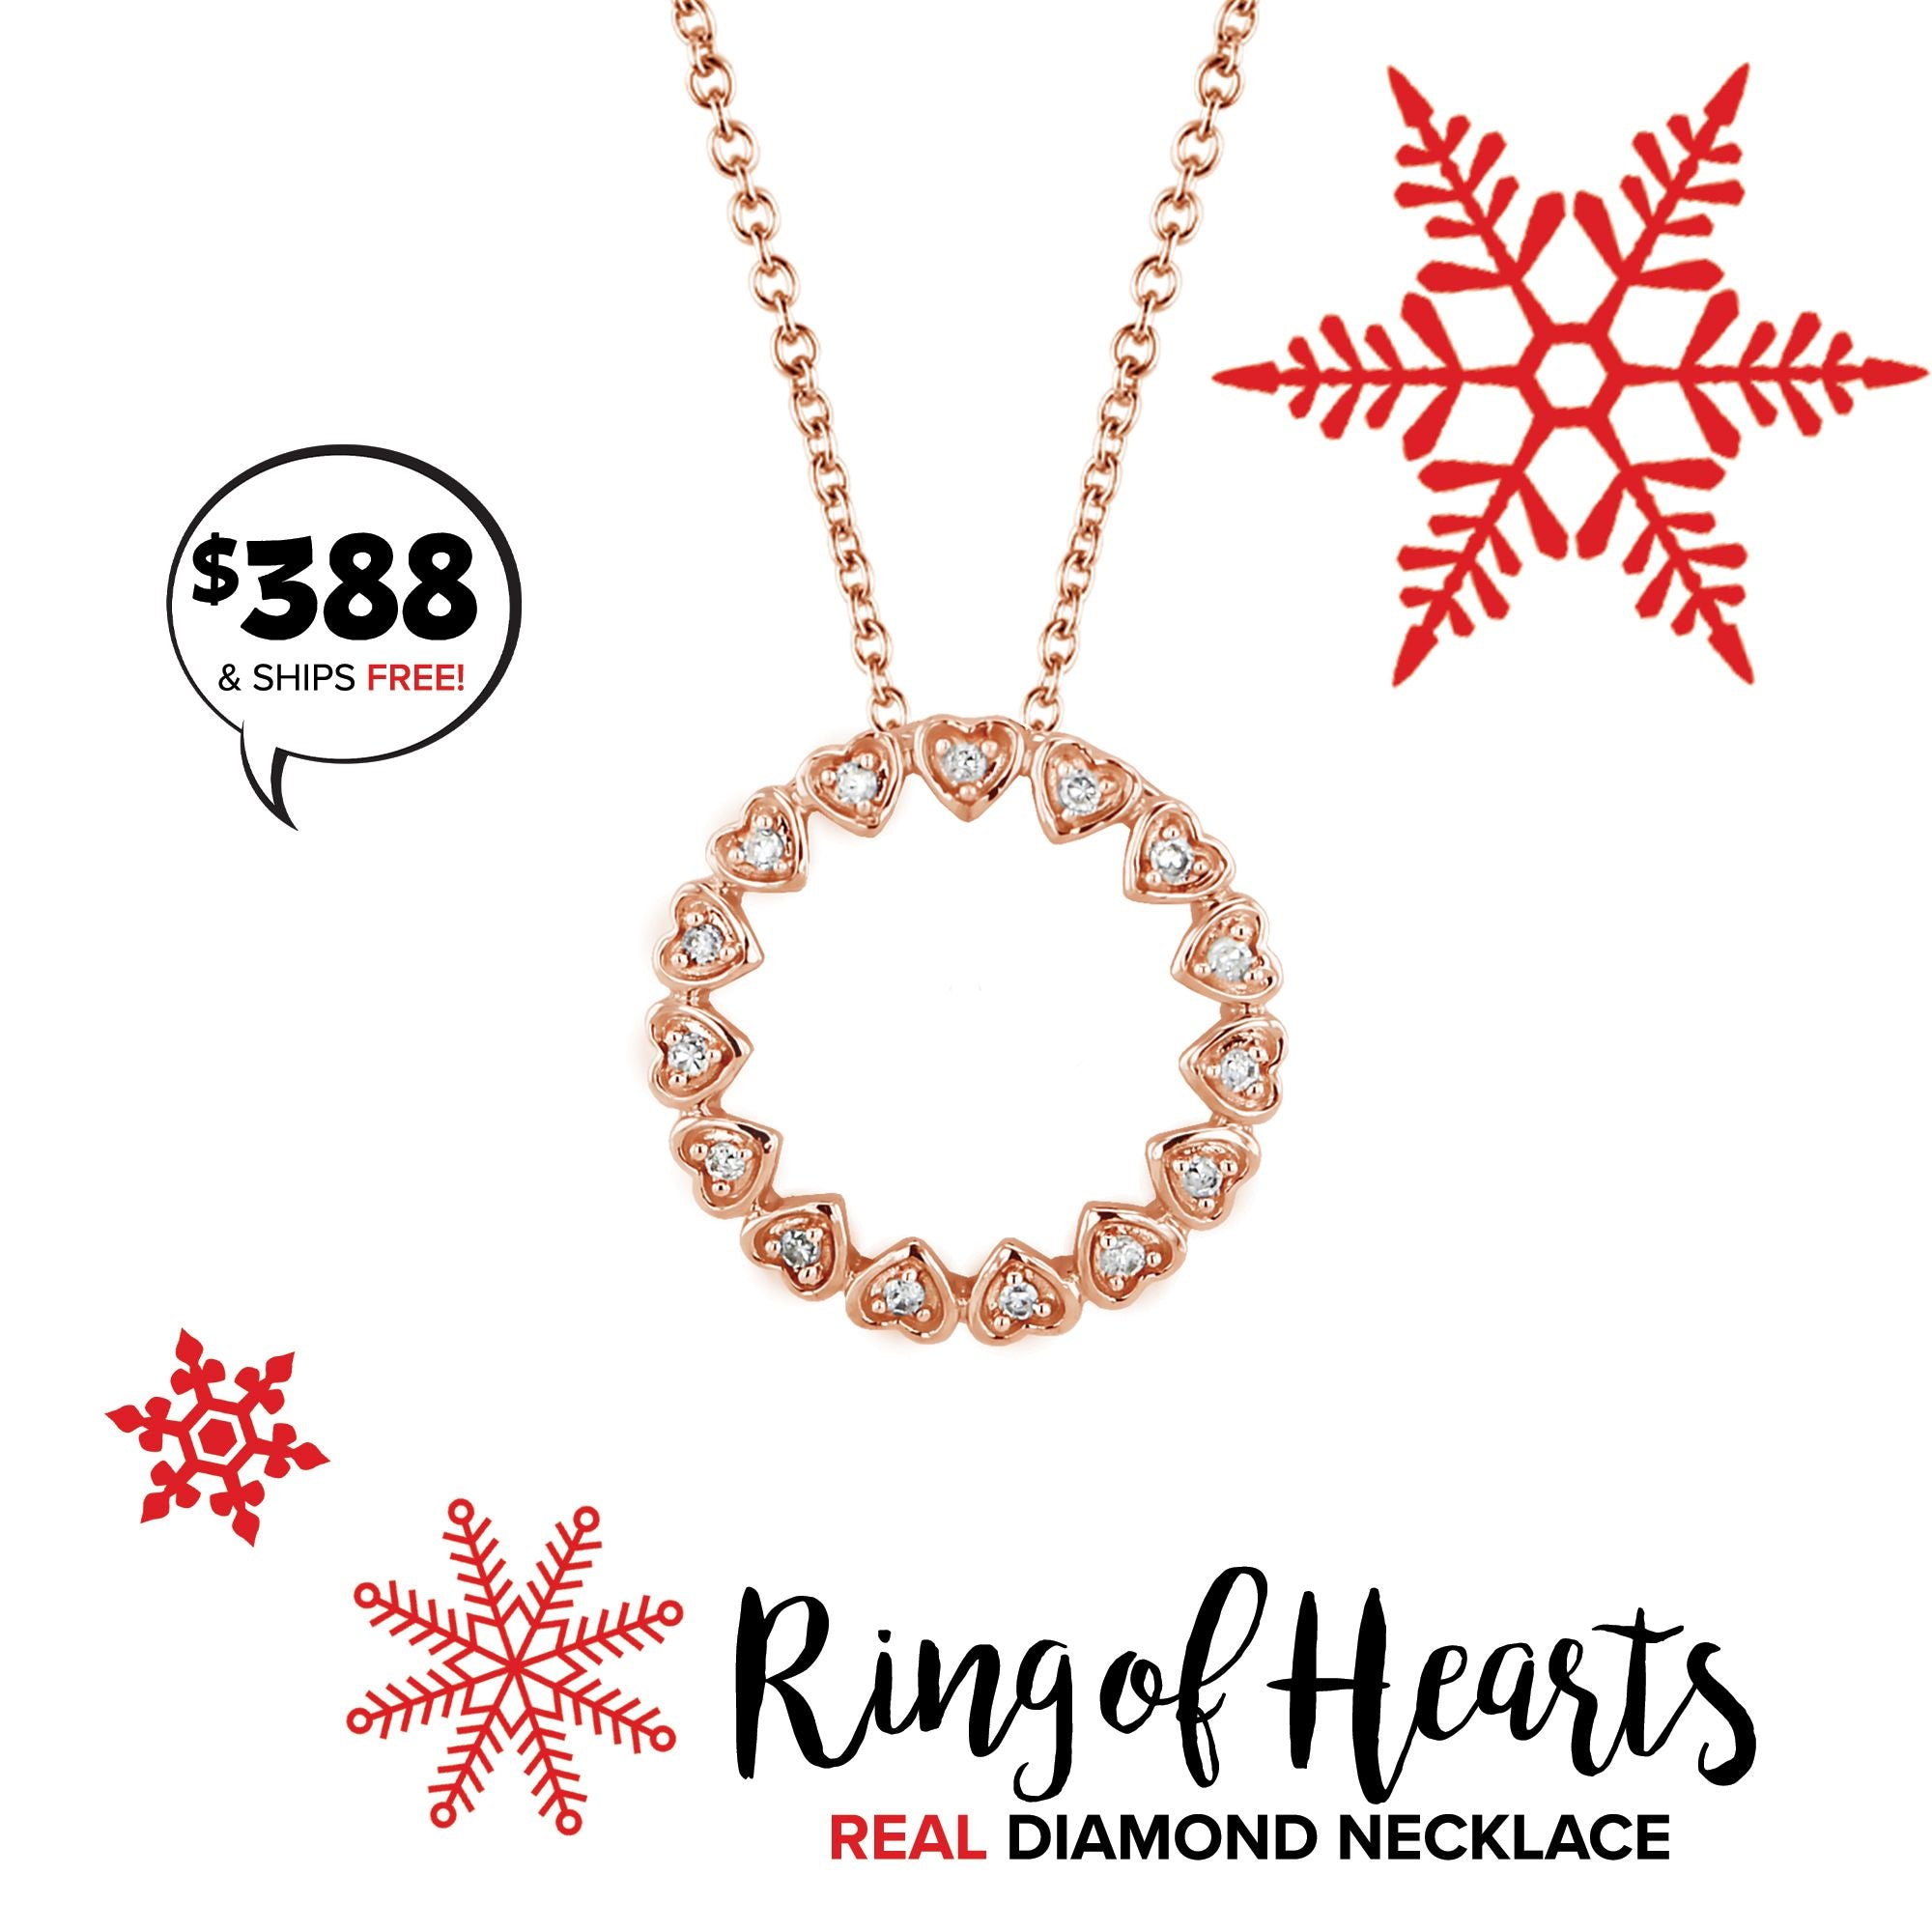 Ring of Hearts Diamond Necklace from Steven Singer Jewelers